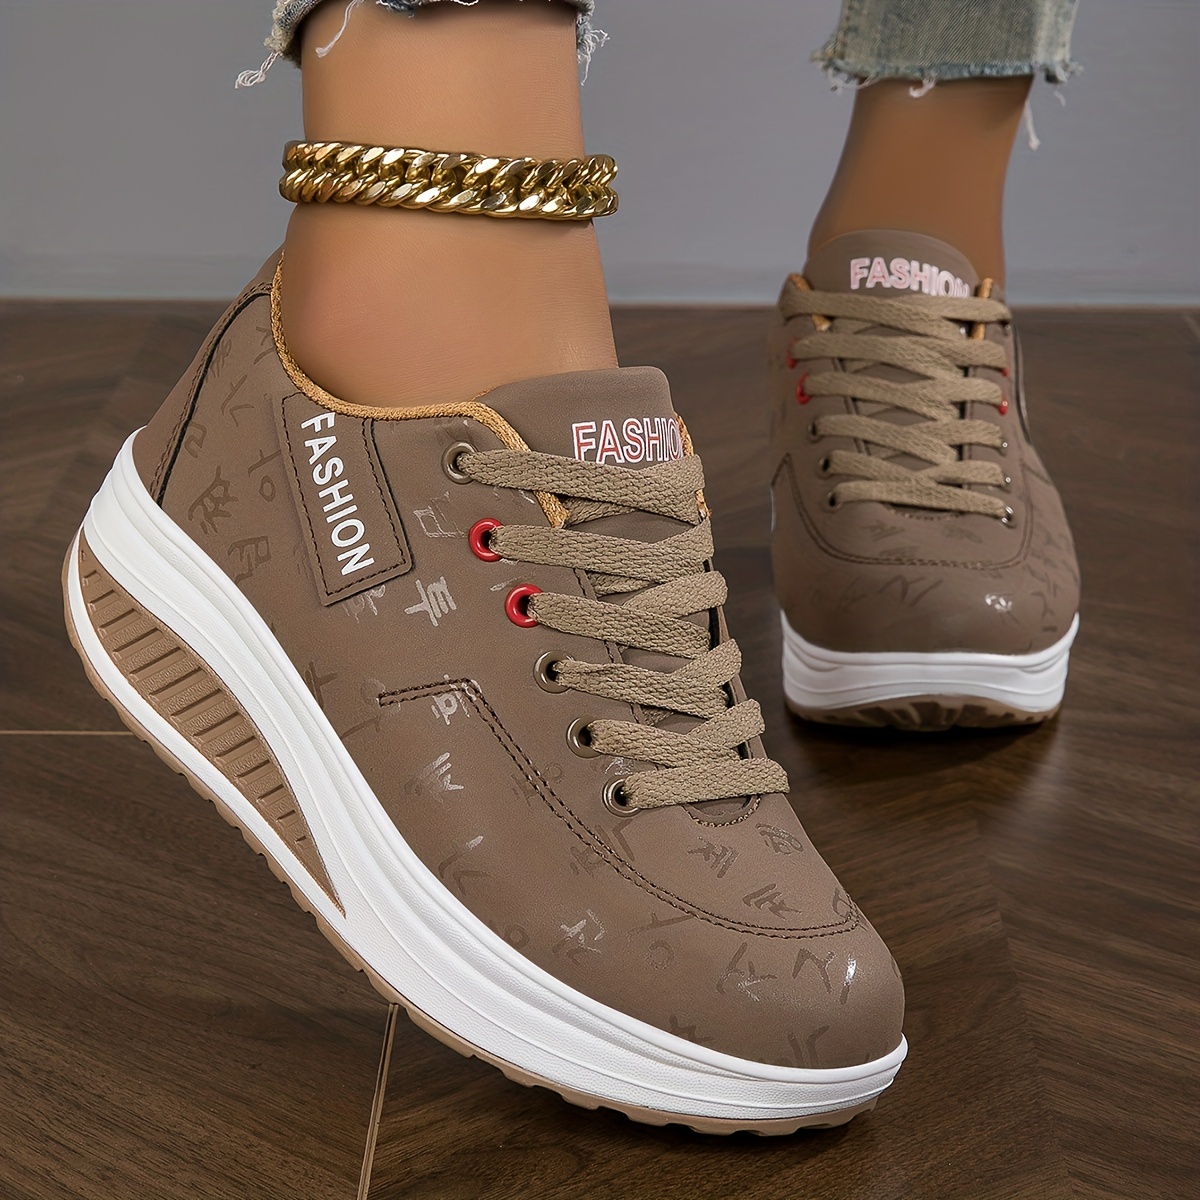 

Women's Wedge Rocker Sneakers, Casual Lace Up Low Top Height Increasing Trainers, Comfort Walking Platform Shoes